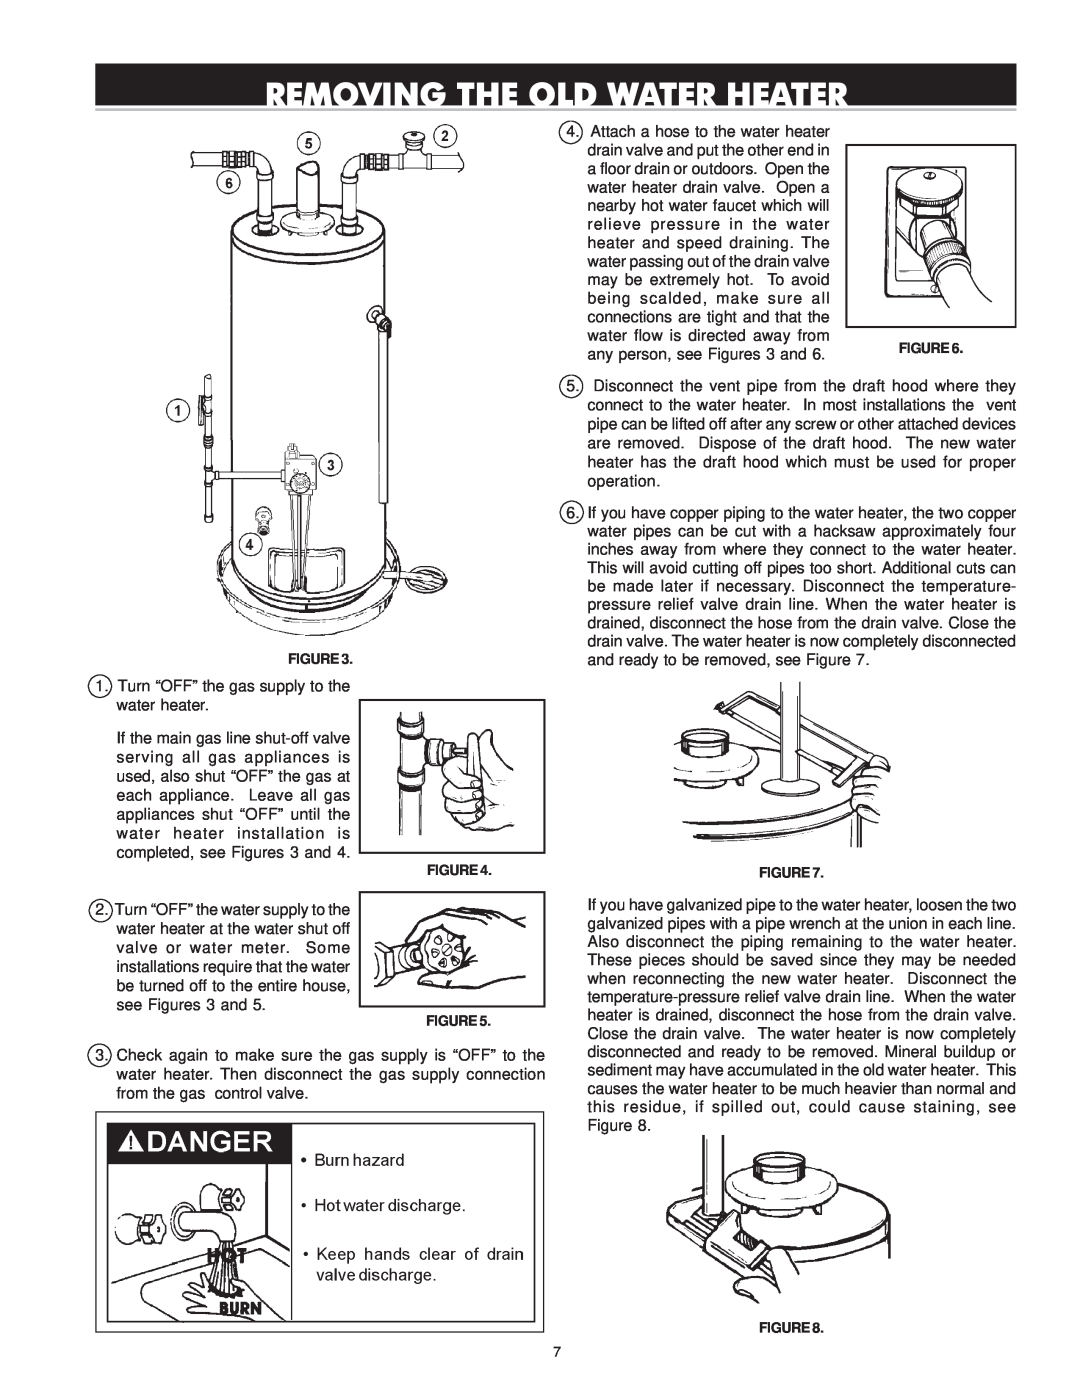 Reliance Water Heaters 606 Series, 196296-001 instruction manual Removing The Old Water Heater 